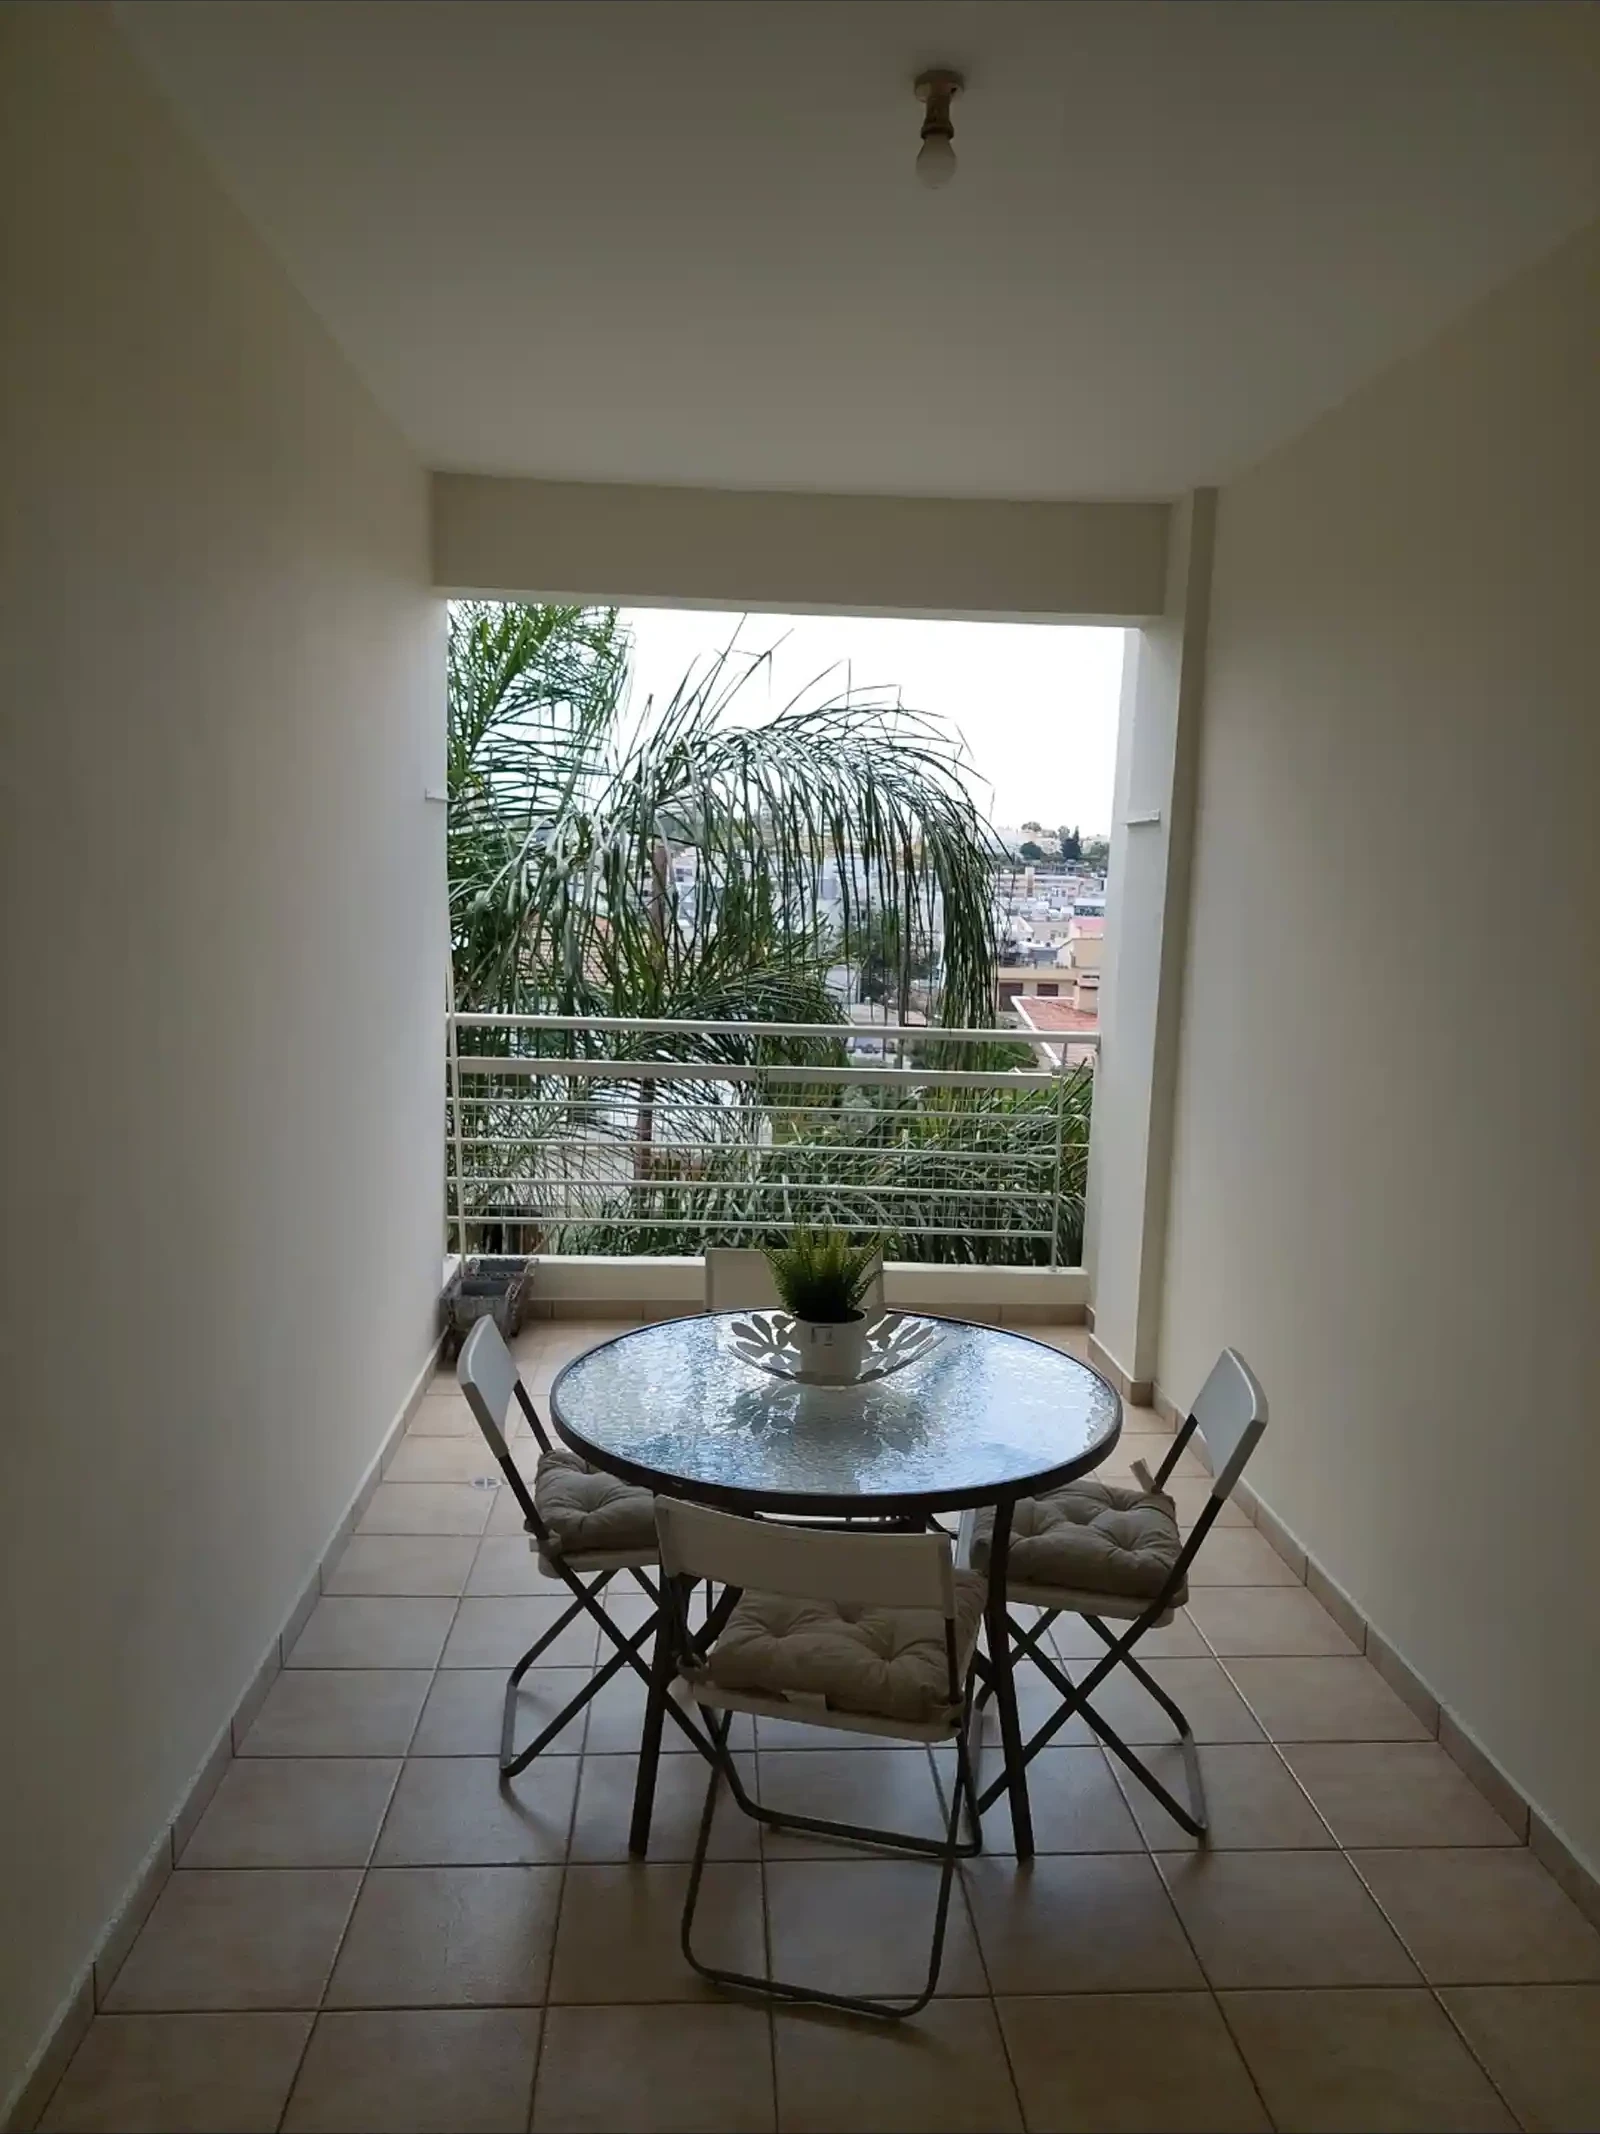 1-bedroom apartment fоr sаle €150.000, image 1